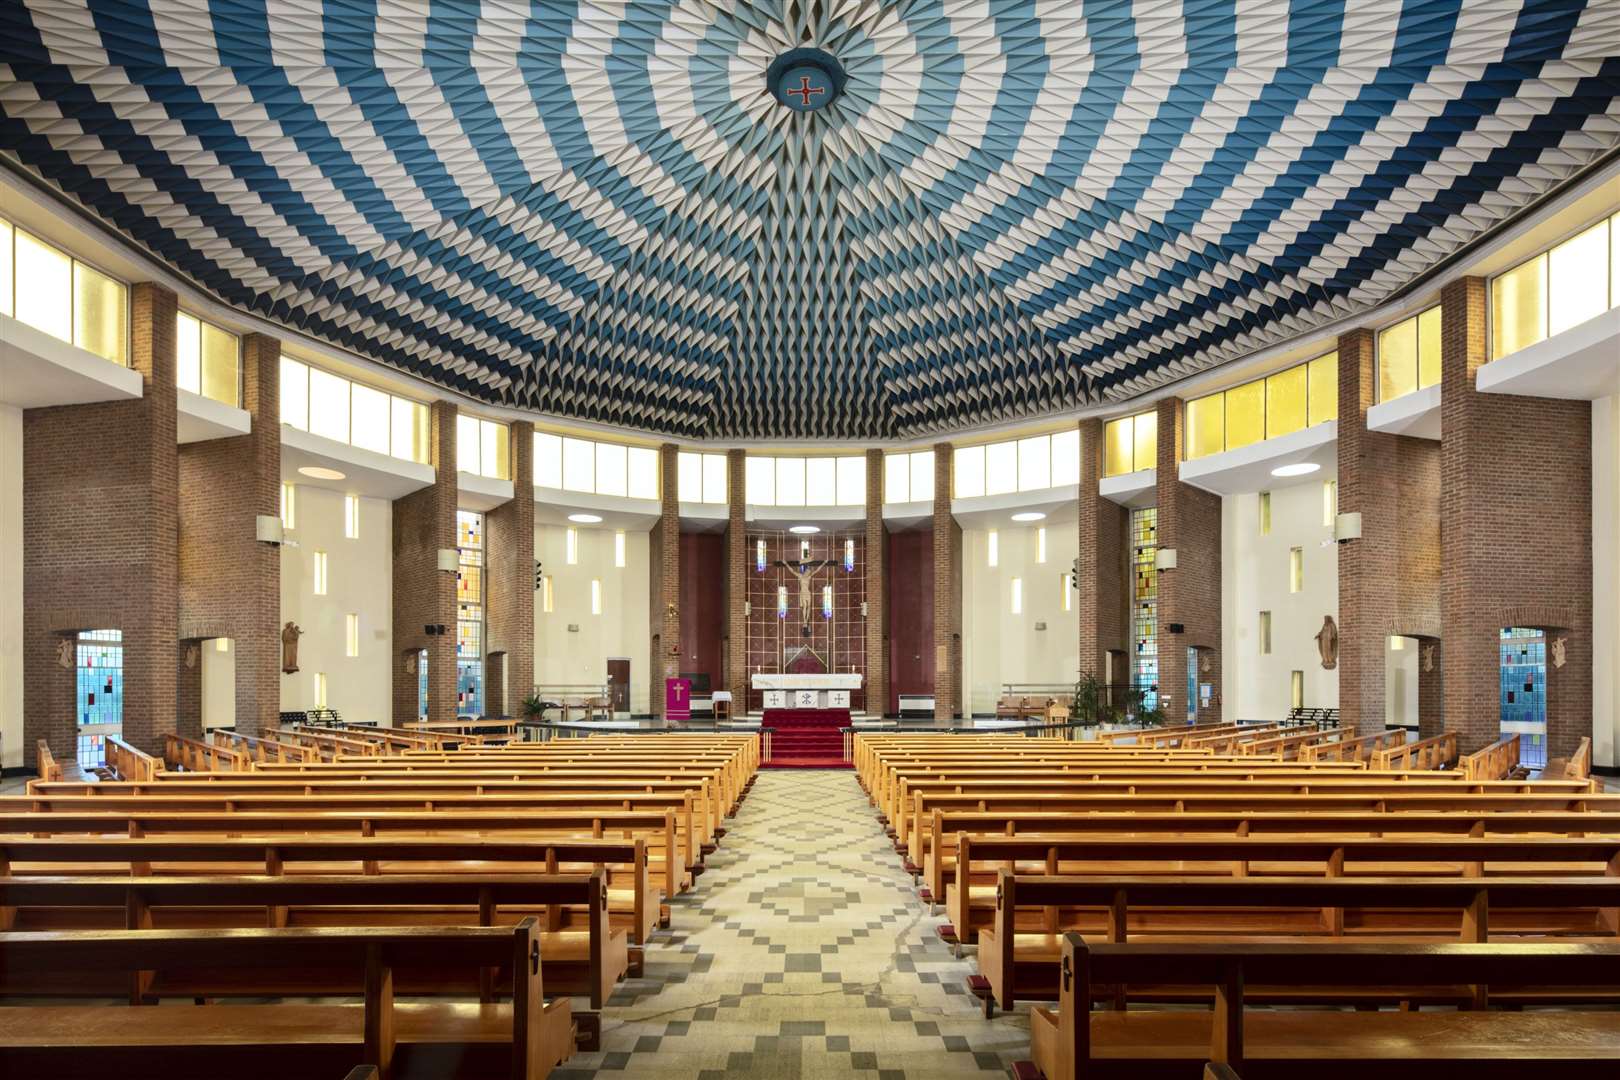 Ceiling in the Roman Catholic Church in St Mary, Dunstable, which is one of the 423 historic sites that have been listed in 2020 (Historic England Archive)